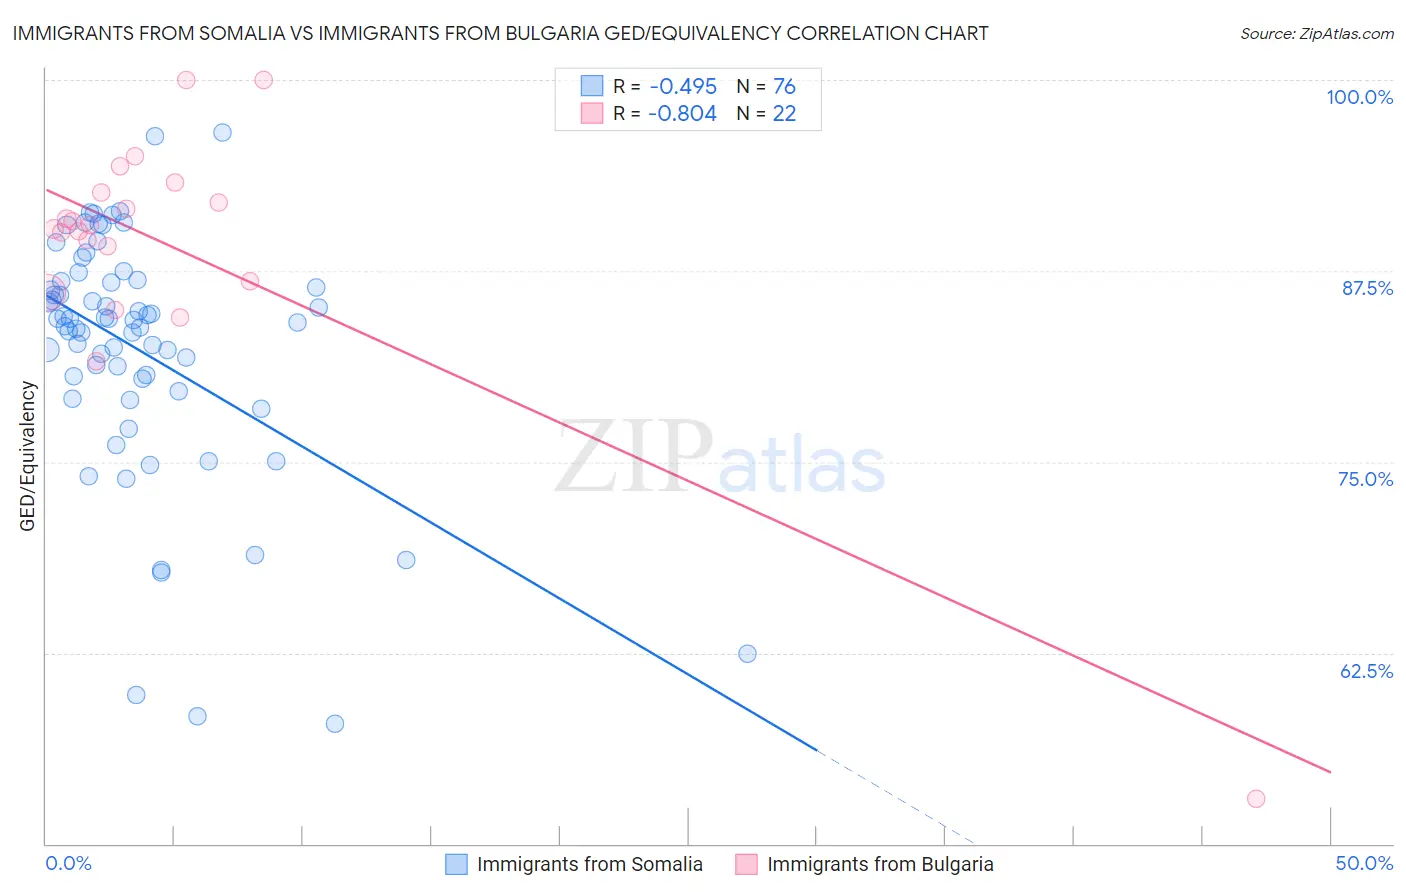 Immigrants from Somalia vs Immigrants from Bulgaria GED/Equivalency